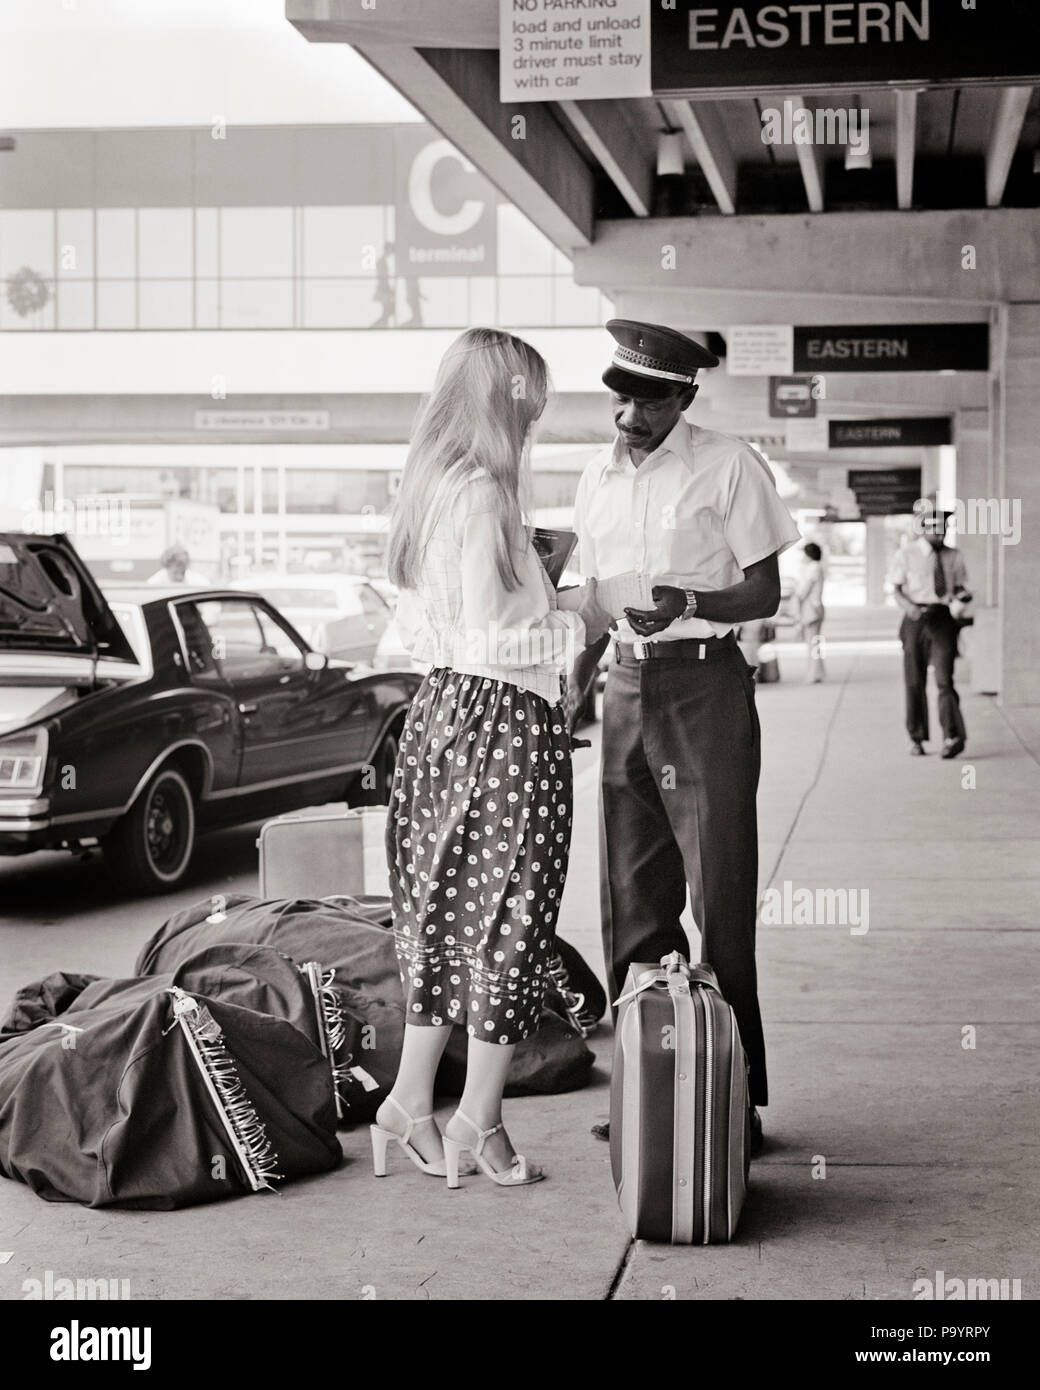 1970s BLONDE WOMAN CHECKING BAGS CURBSIDE WITH  AFRICAN AMERICAN AIRPORT SKYCAP - a8596 HAR001 HARS INFORMATION CHECKING LIFESTYLE AIRLINE FEMALES JOBS COPY SPACE FULL-LENGTH LADIES PERSONS MALES TRANSPORTATION B&W OCCUPATION ADVENTURE STYLES CUSTOMER SERVICE AFRICAN-AMERICANS AFRICAN-AMERICAN BLACK ETHNICITY LABOR EMPLOYMENT OCCUPATIONS TRAVELING CONNECTION STYLISH CURBSIDE EMPLOYEE FASHIONS MID-ADULT MID-ADULT MAN TRAVELER YOUNG ADULT WOMAN BAGGAGE BLACK AND WHITE CAUCASIAN ETHNICITY HAR001 LABORING OLD FASHIONED AFRICAN AMERICANS Stock Photo